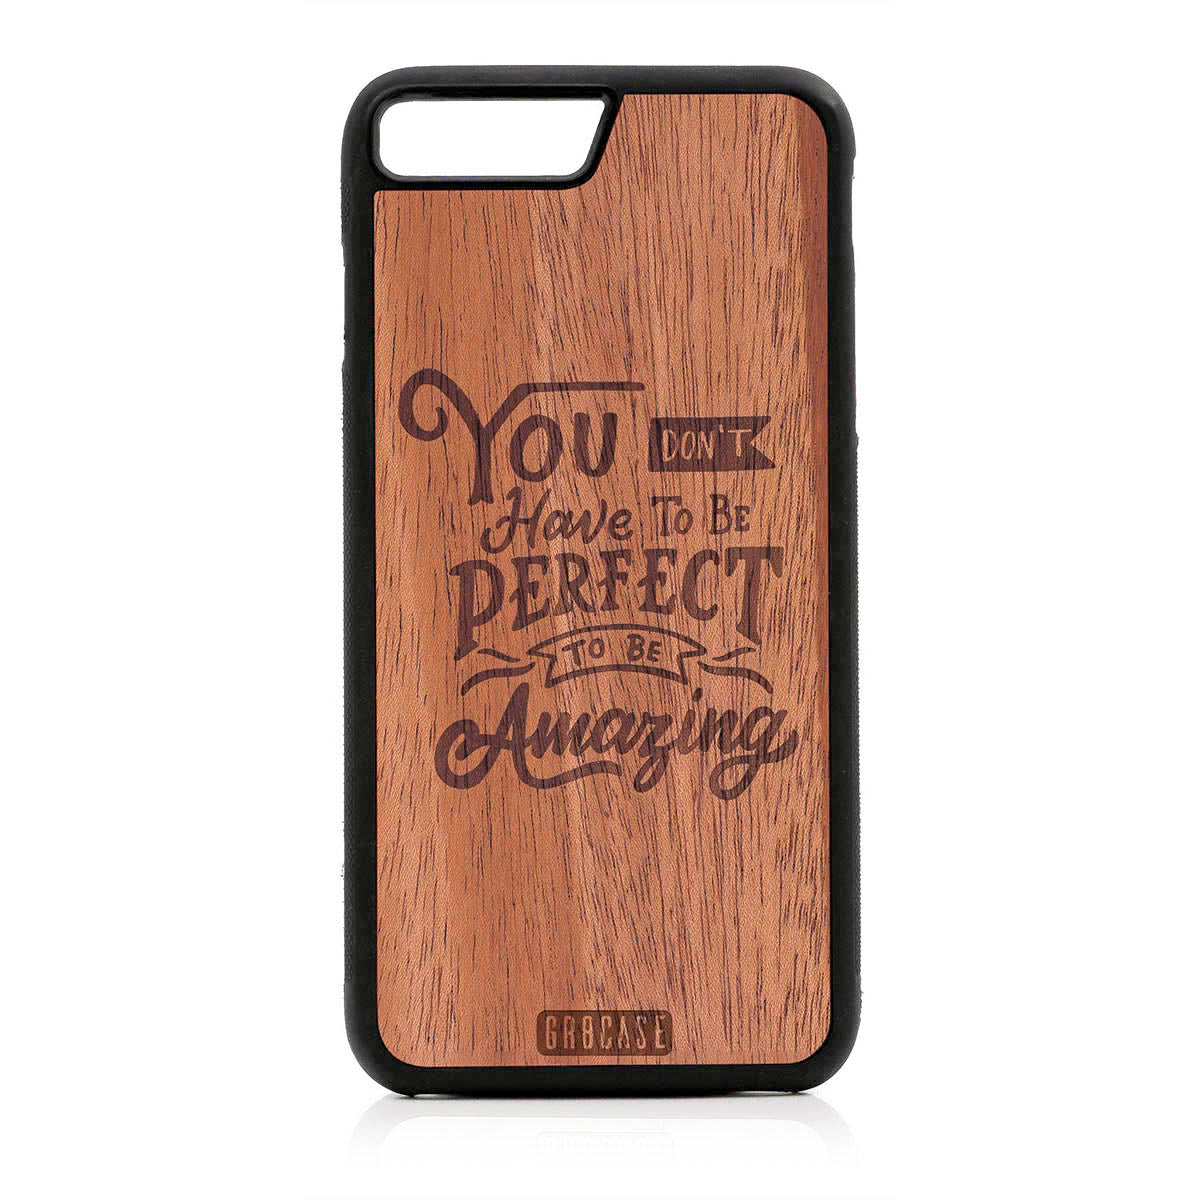 You Don't Have To Be Perfect To Be Amazing Design Wood Case For iPhone 7 Plus / 8 Plus